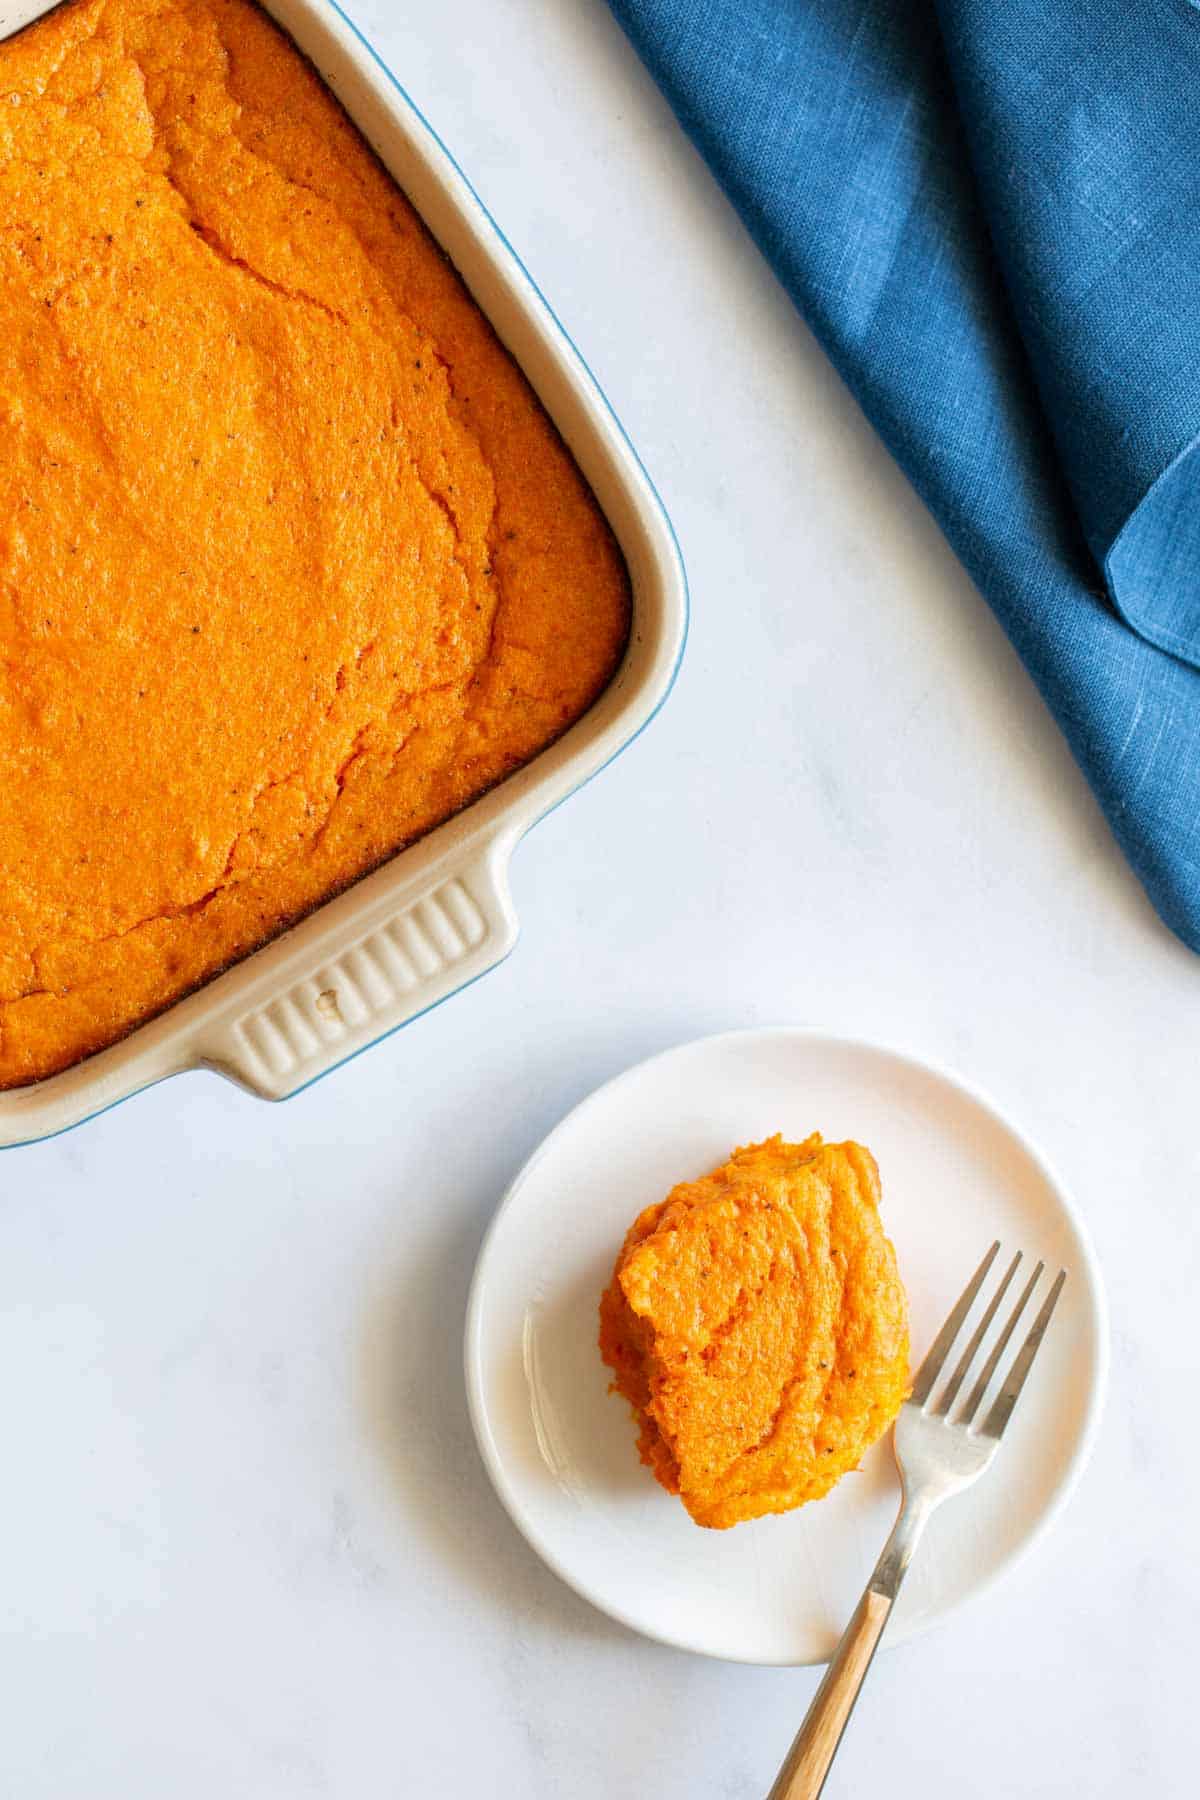 A serving of carrot souffle on a white plate with a fork, beside a full casserole dish on a kitchen counter.